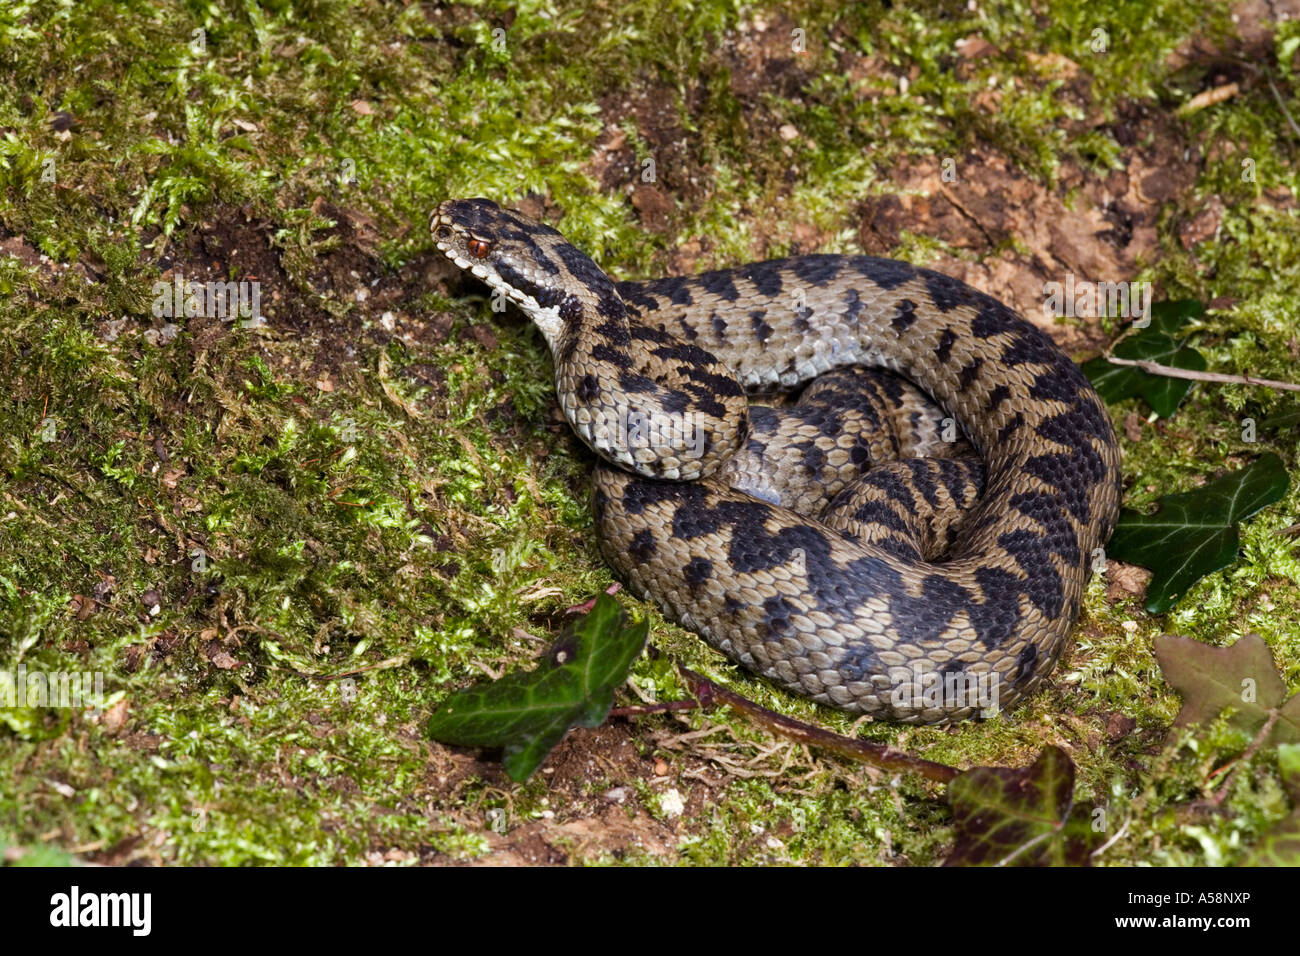 Adder Vipera berus sunning itself on moss covered log looking alert with head up leicestershire Stock Photo